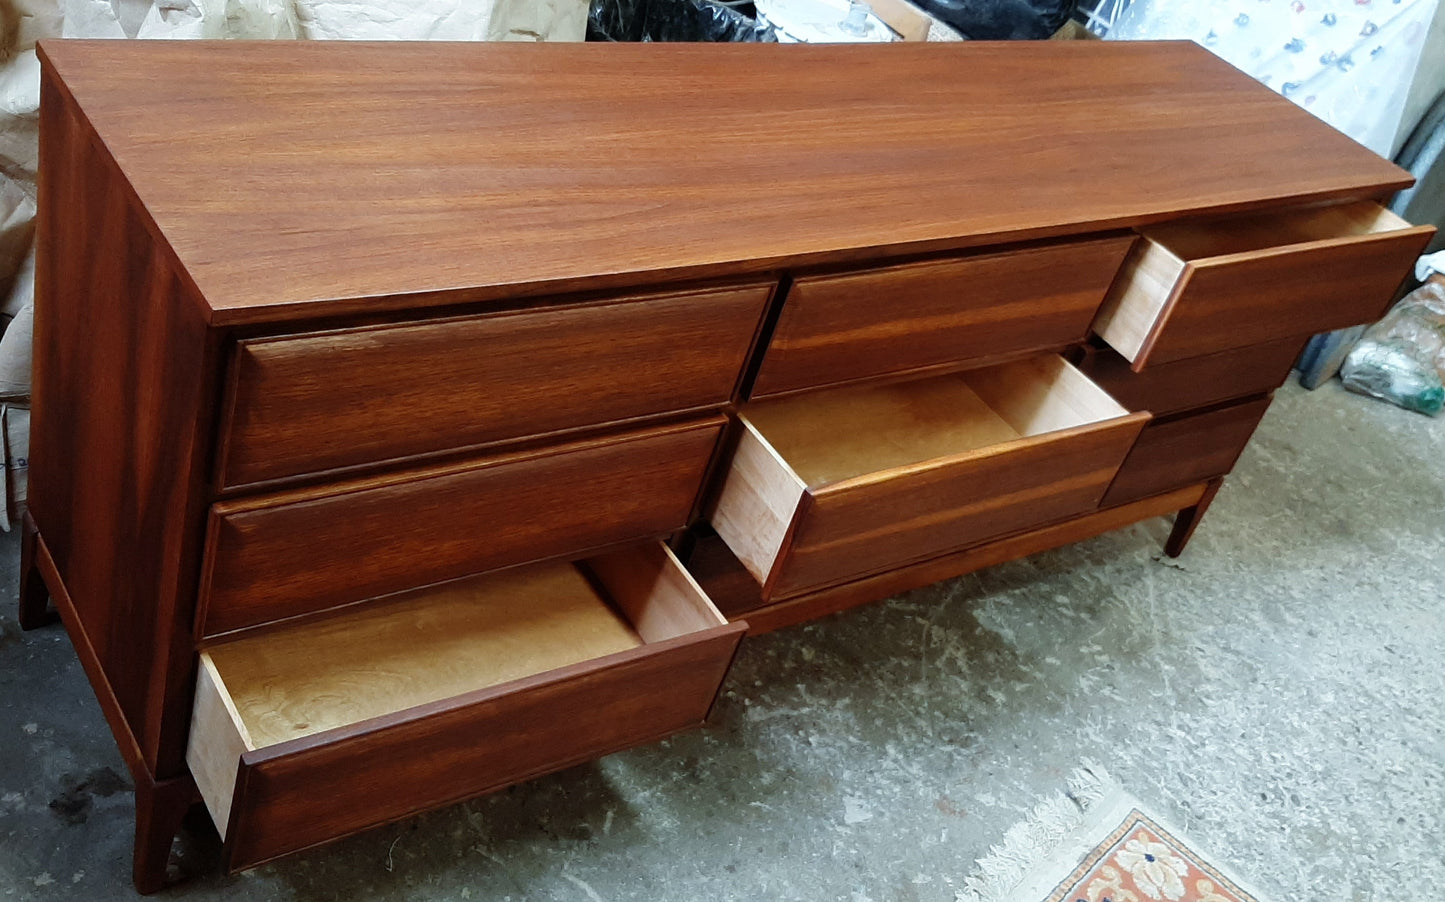 REFINISHED MCM Walnut Dresser 3-Dimensional Front 6ft by HPL Mobilier, PERFECT - Mid Century Modern Toronto